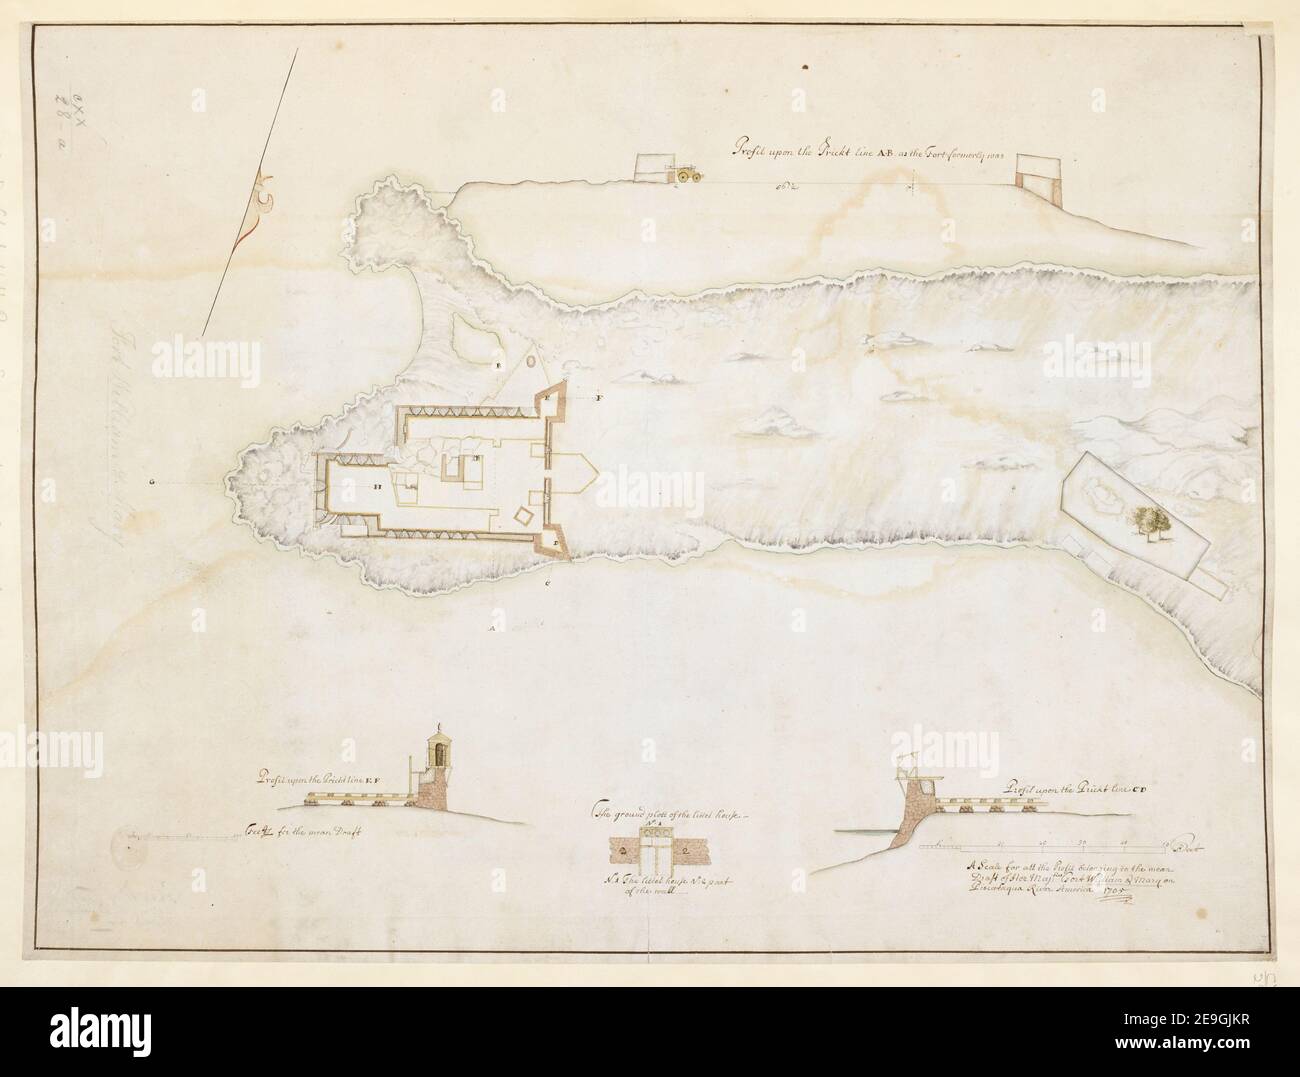 Fort William and Mary on Piscataqua River . Author  Romer, Wolfgang William 120.28.a. Date of publication: [1705]  Item type: 1 drawing Medium: ink and wash Dimensions: sheet 43.8 x 58.5 cm  Former owner: George III, King of Great Britain, 1738-1820 Stock Photo